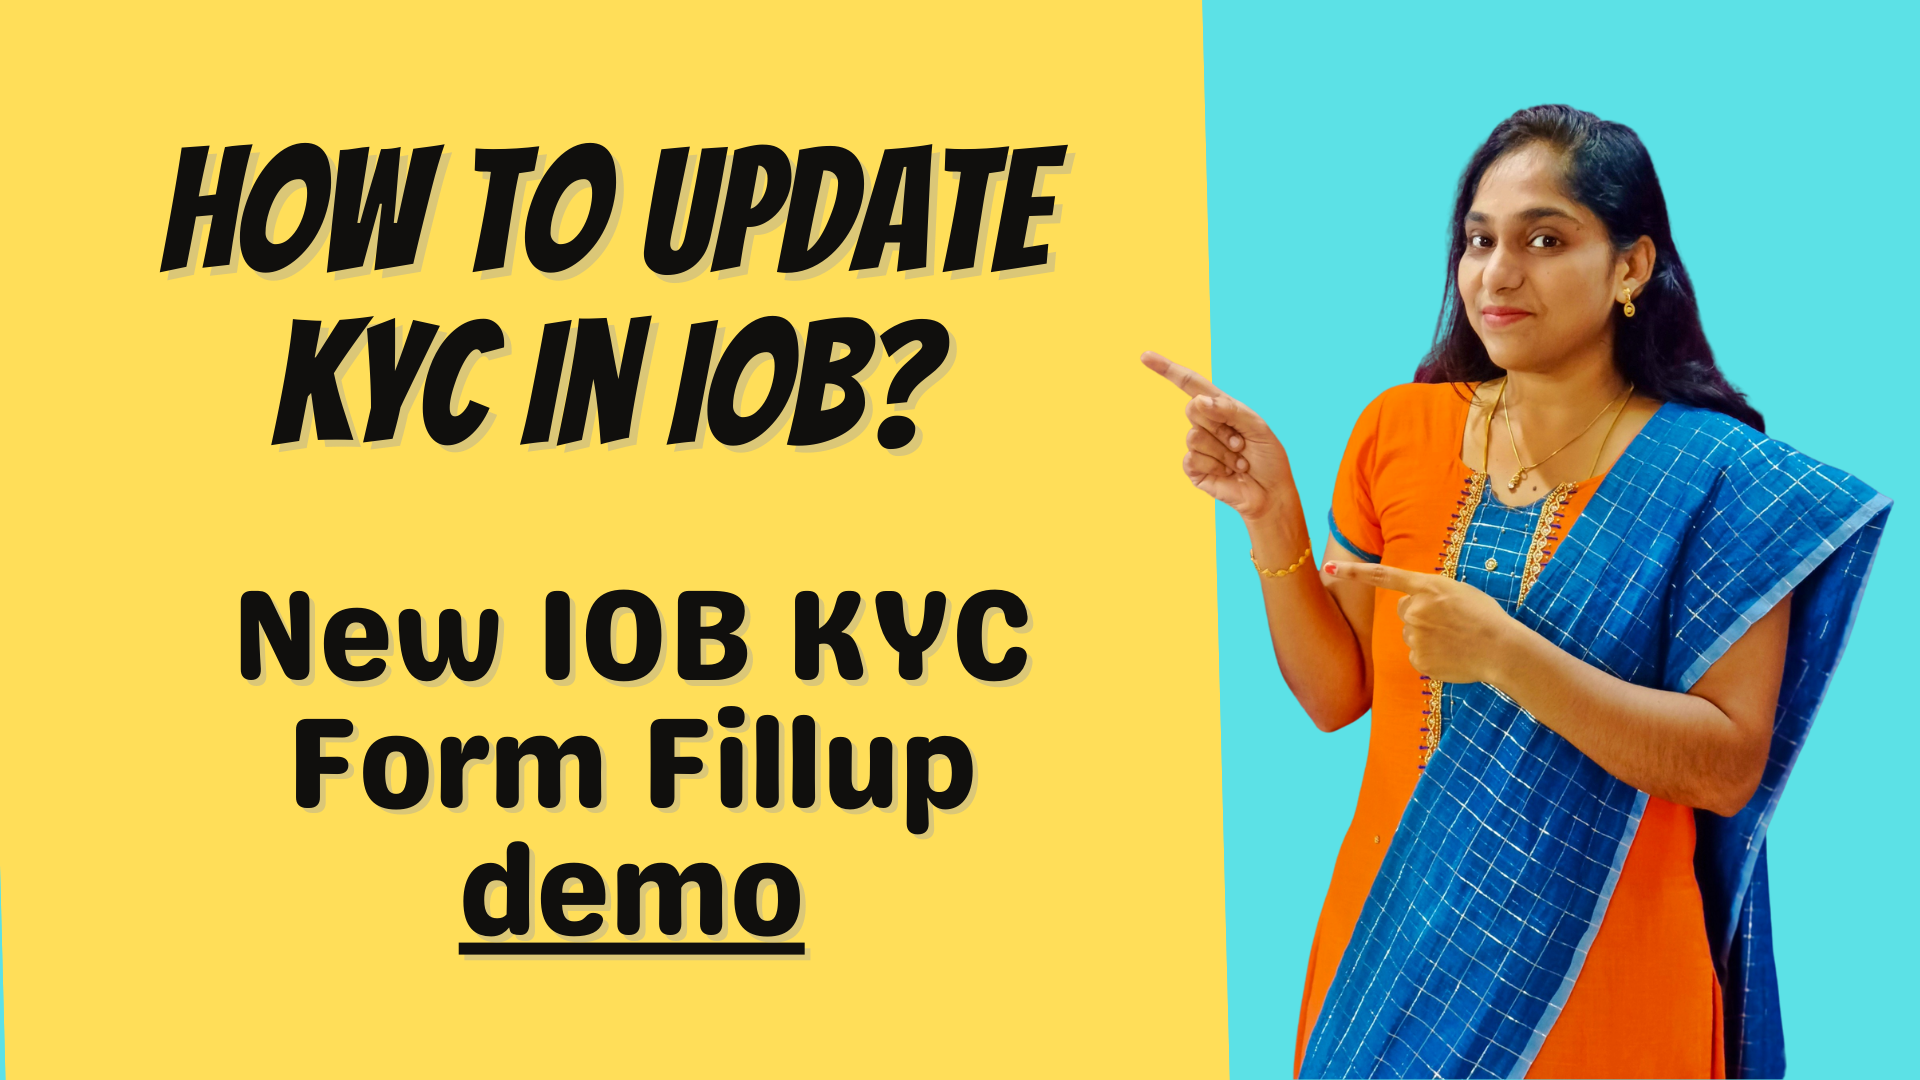 Indian Overseas Bank KYC Form Filling